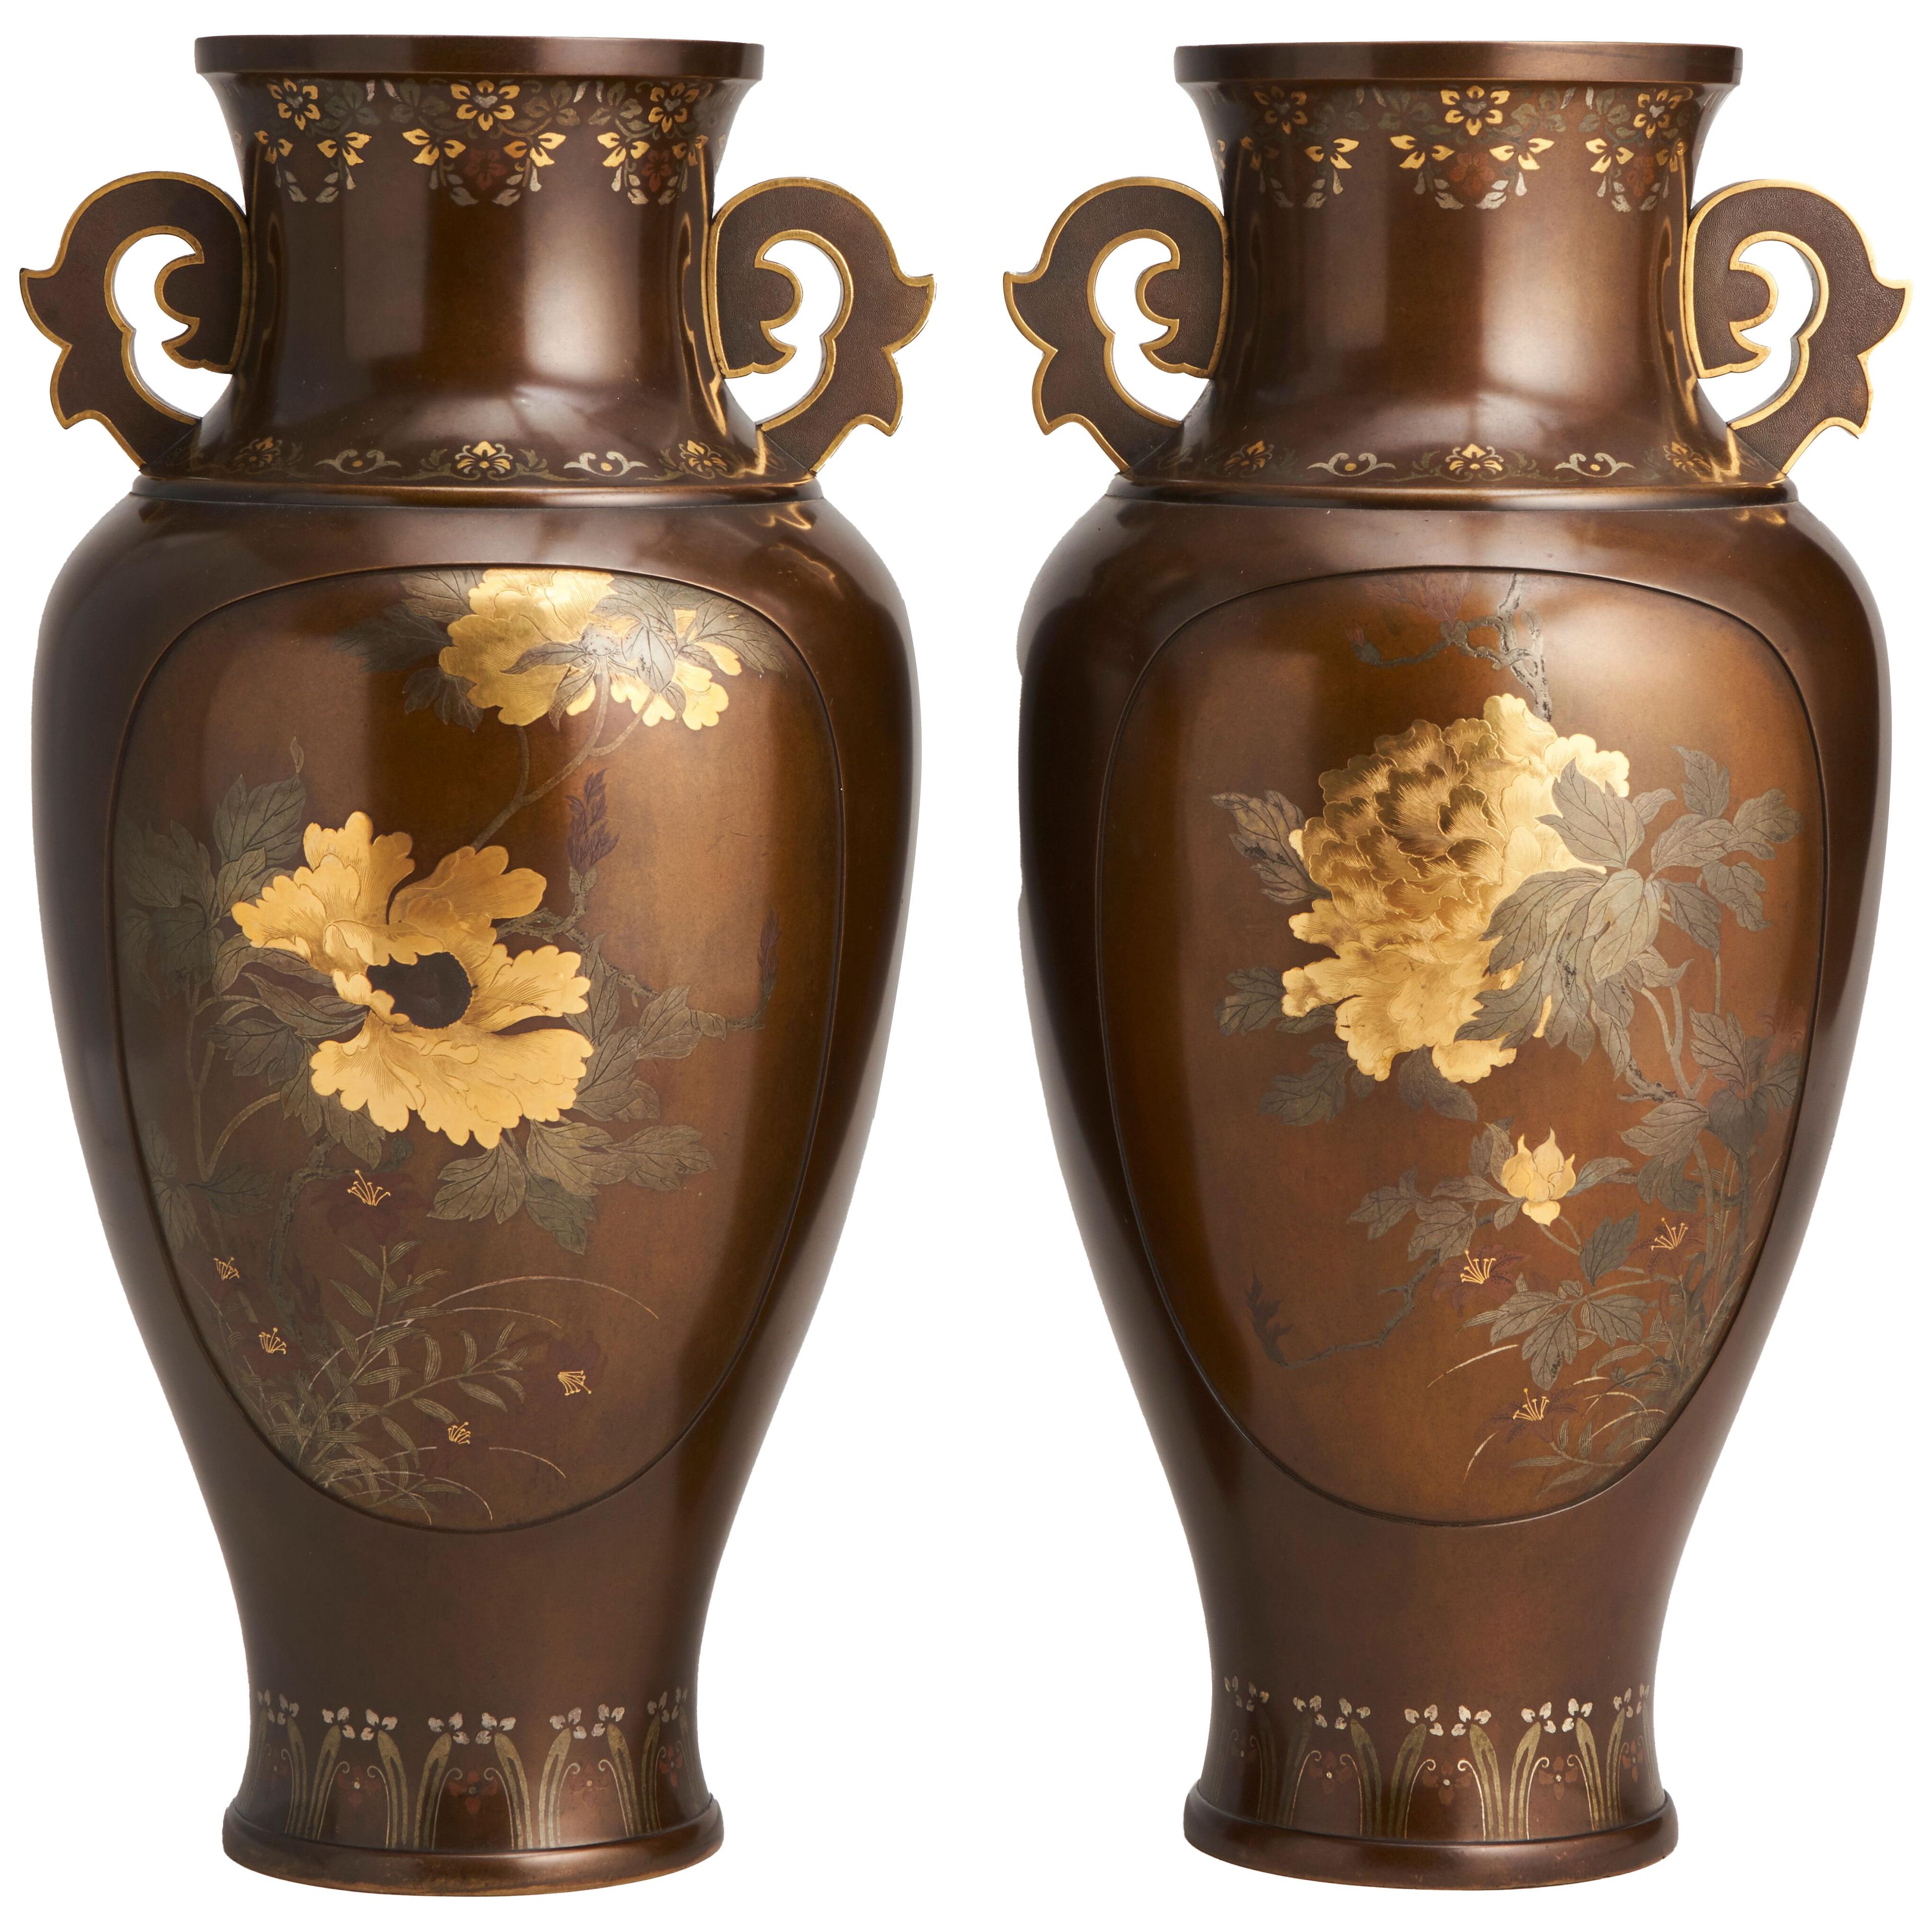 A beautiful pair of inlaid Japanese late 19th Century Bronze vases